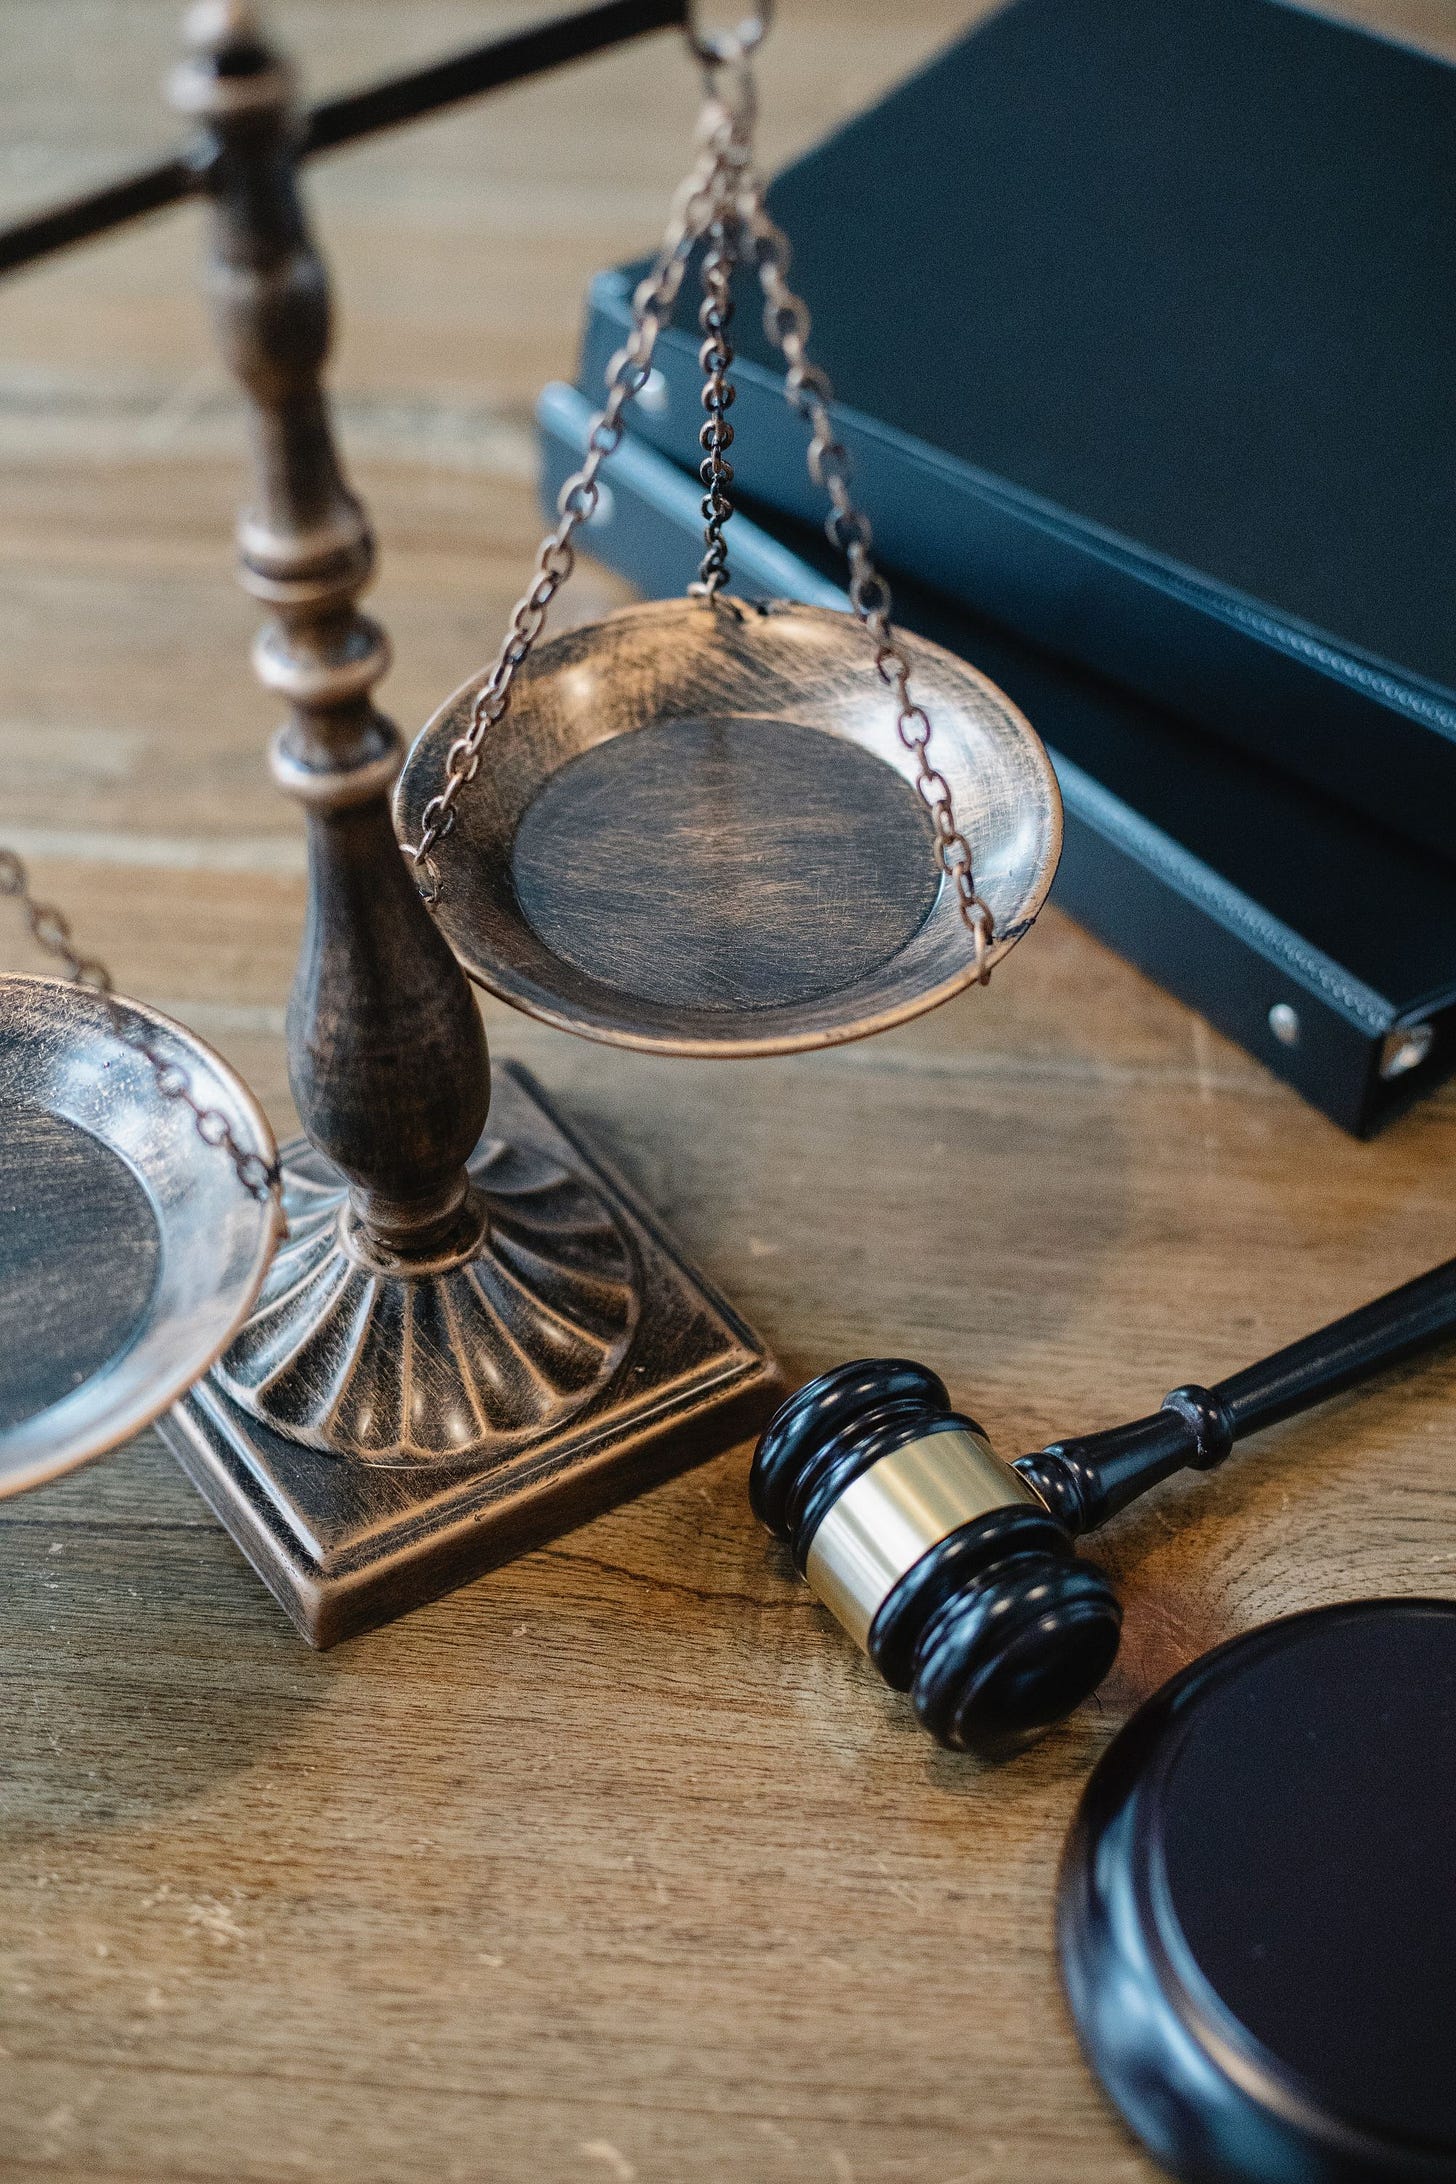 Photo of scales and gavel by Sora Shimazaki from Pexels. 